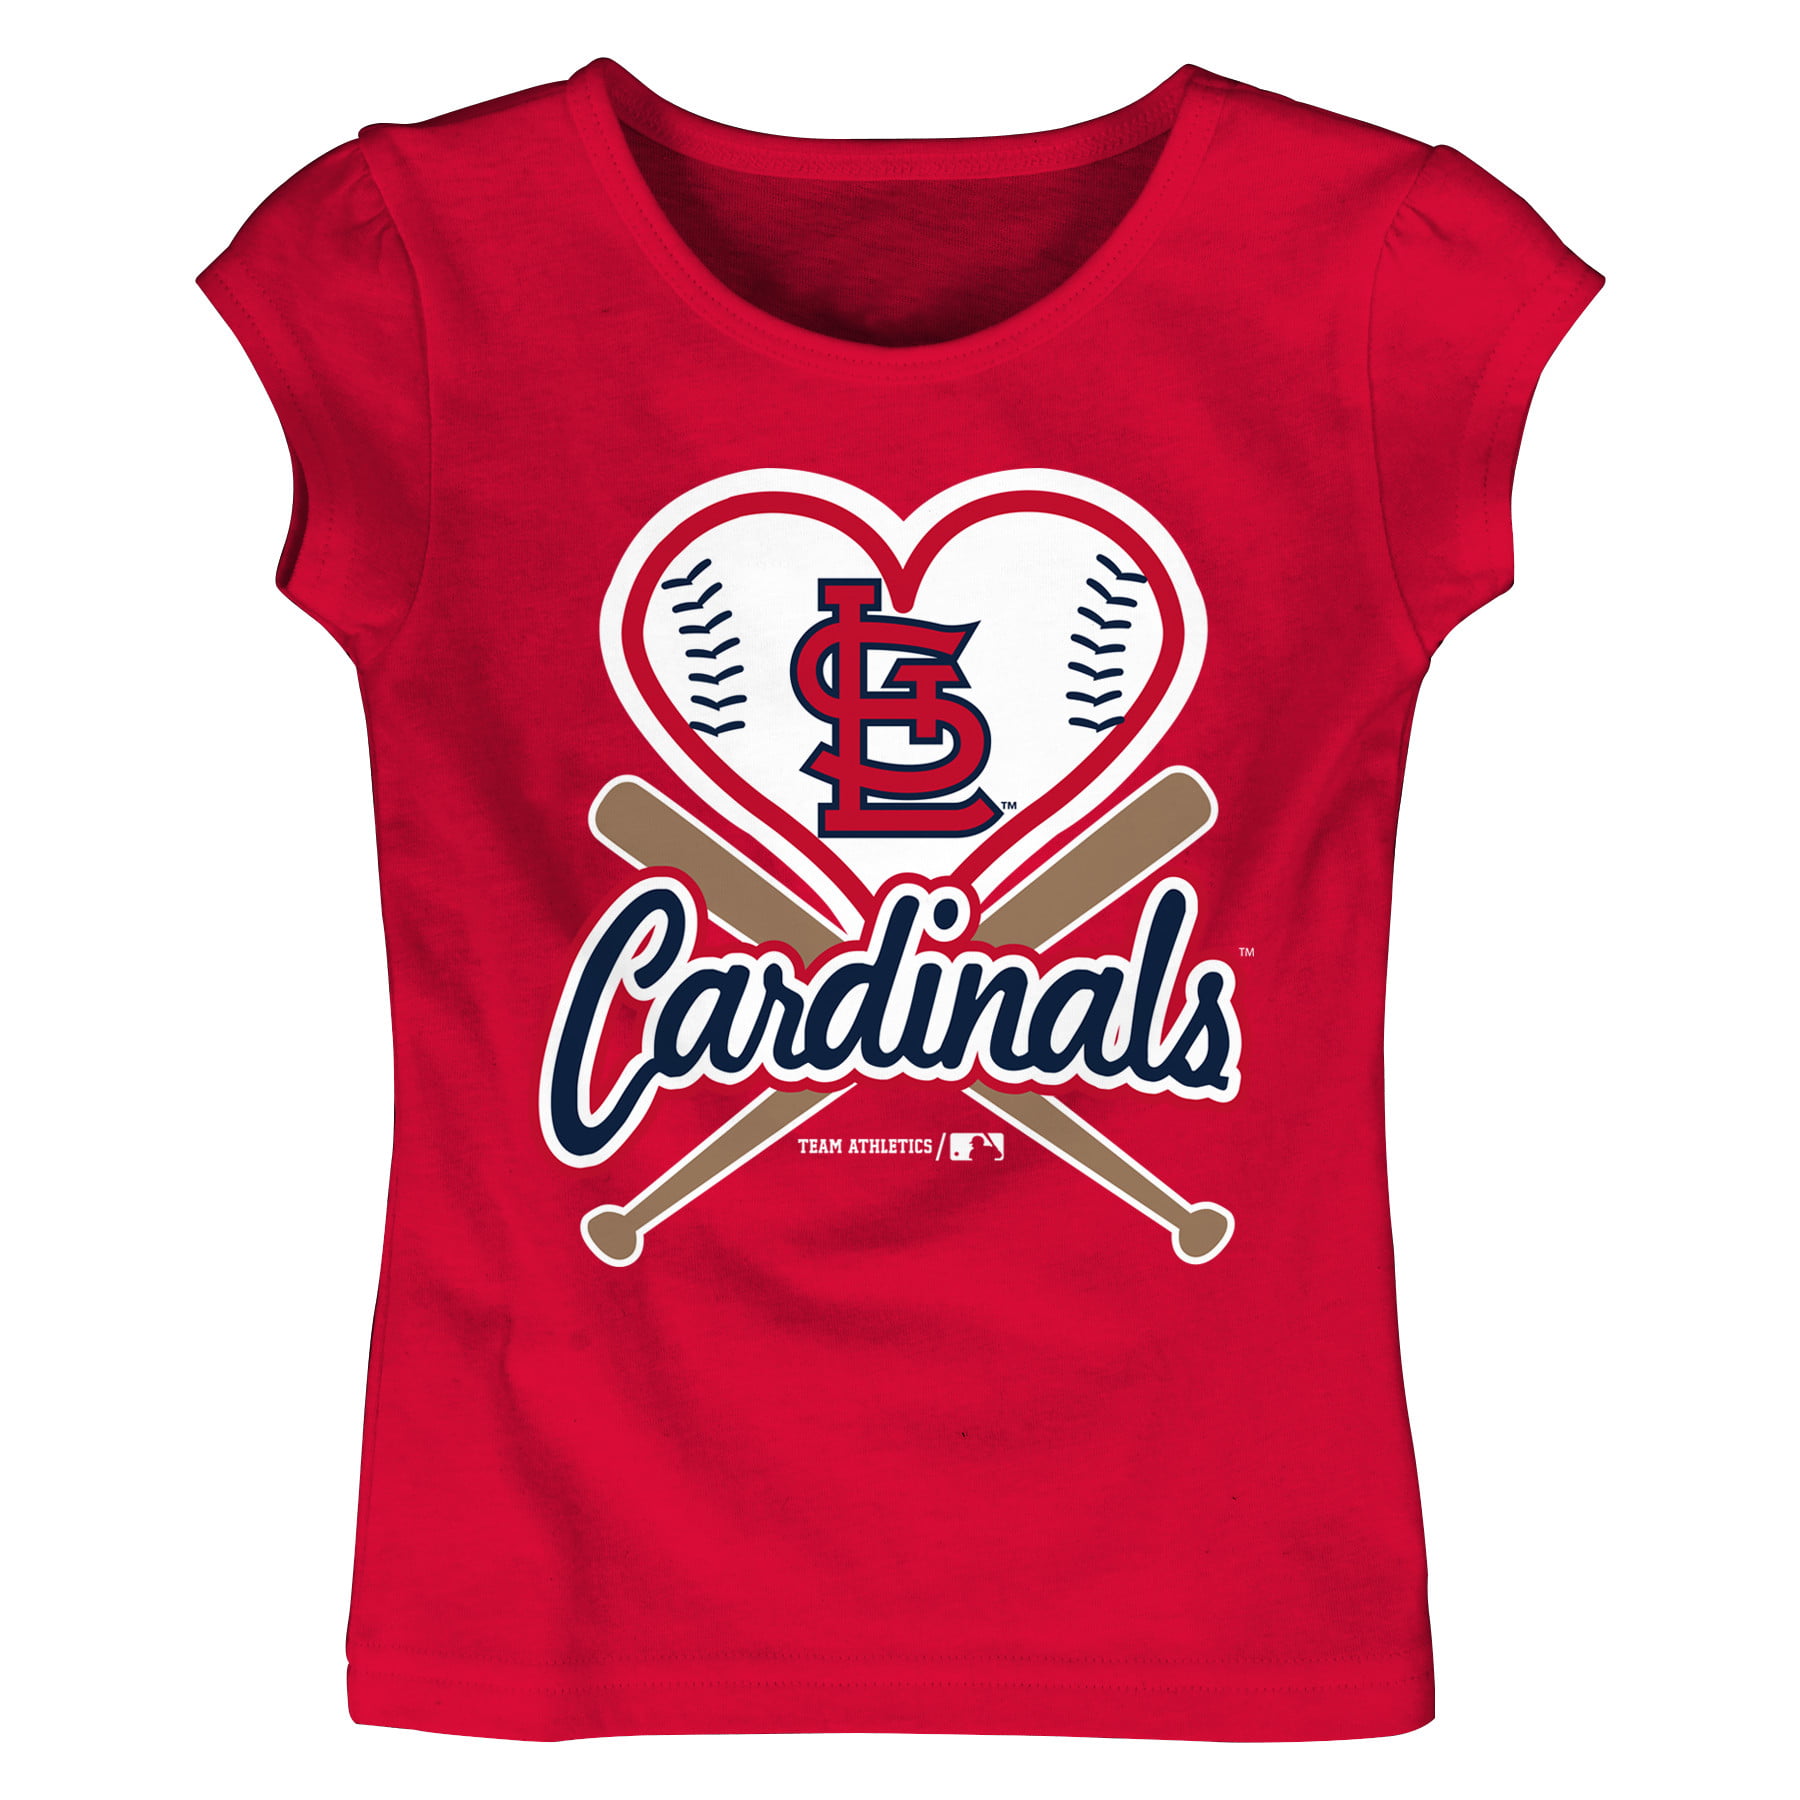 what color jersey are the cardinals wearing today